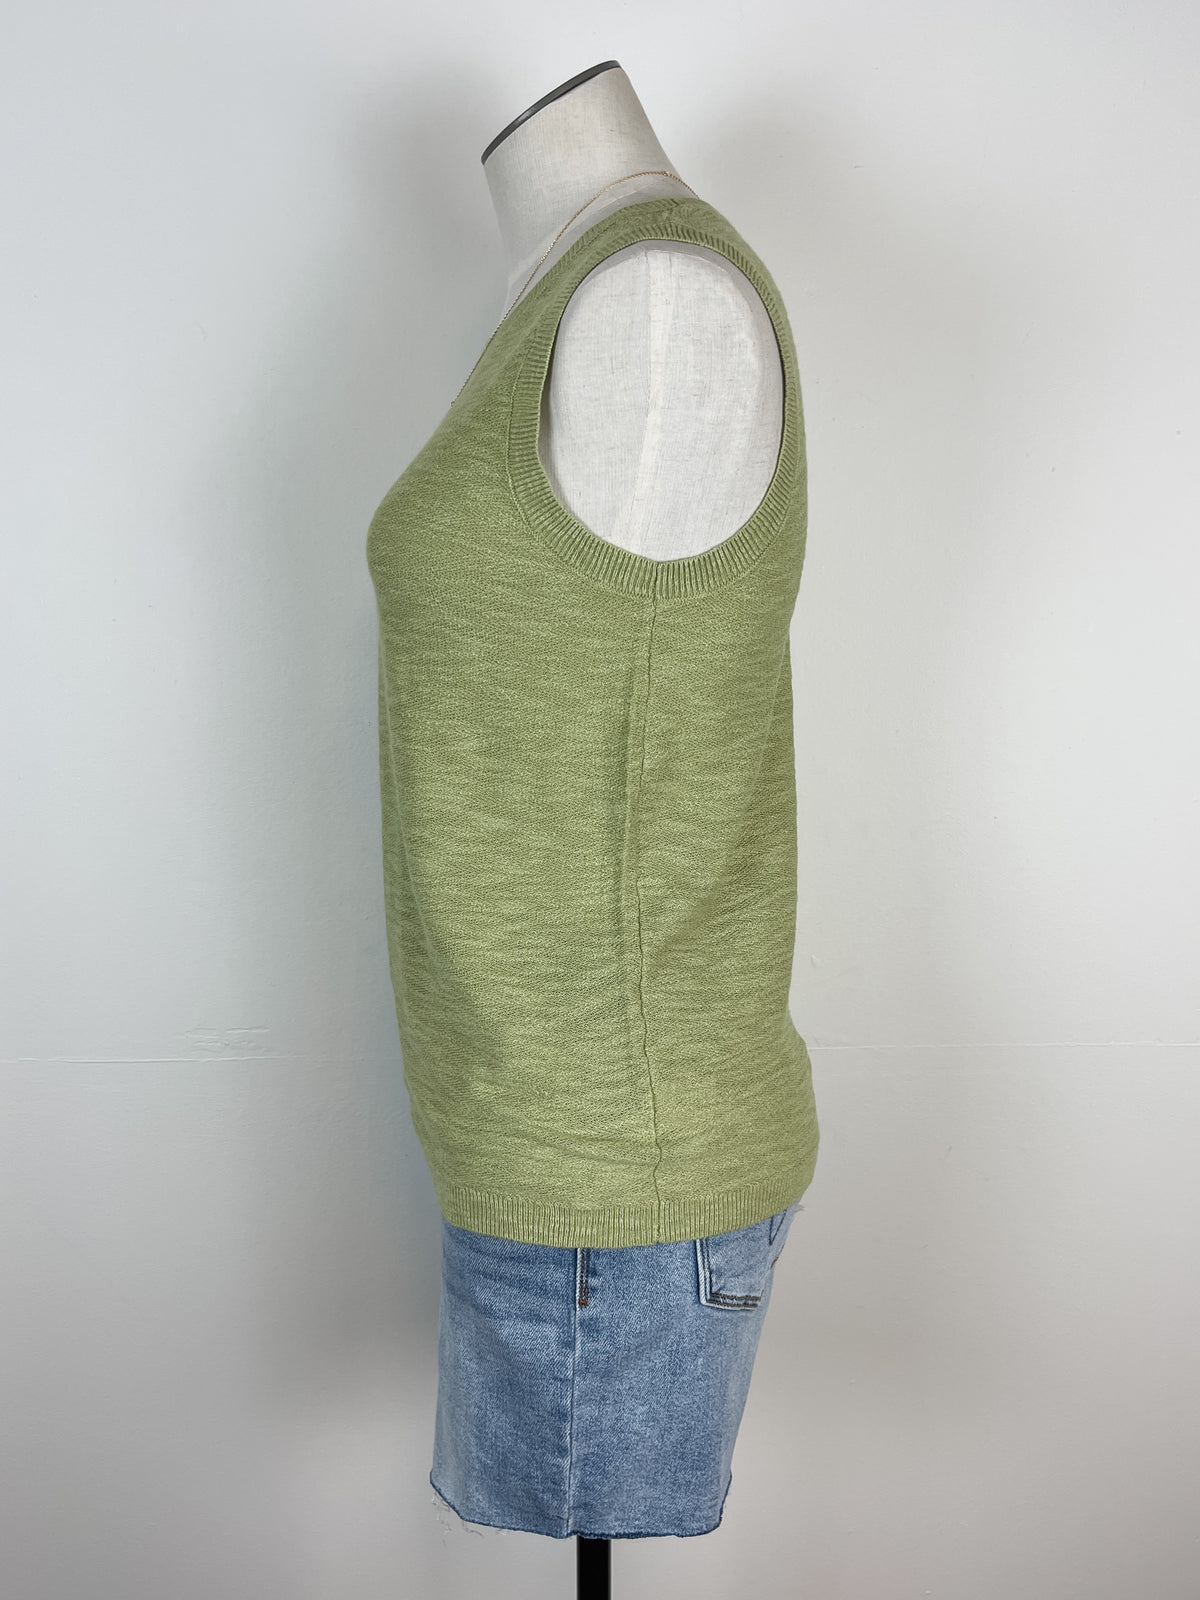 Madeline Knit Tank in Matcha